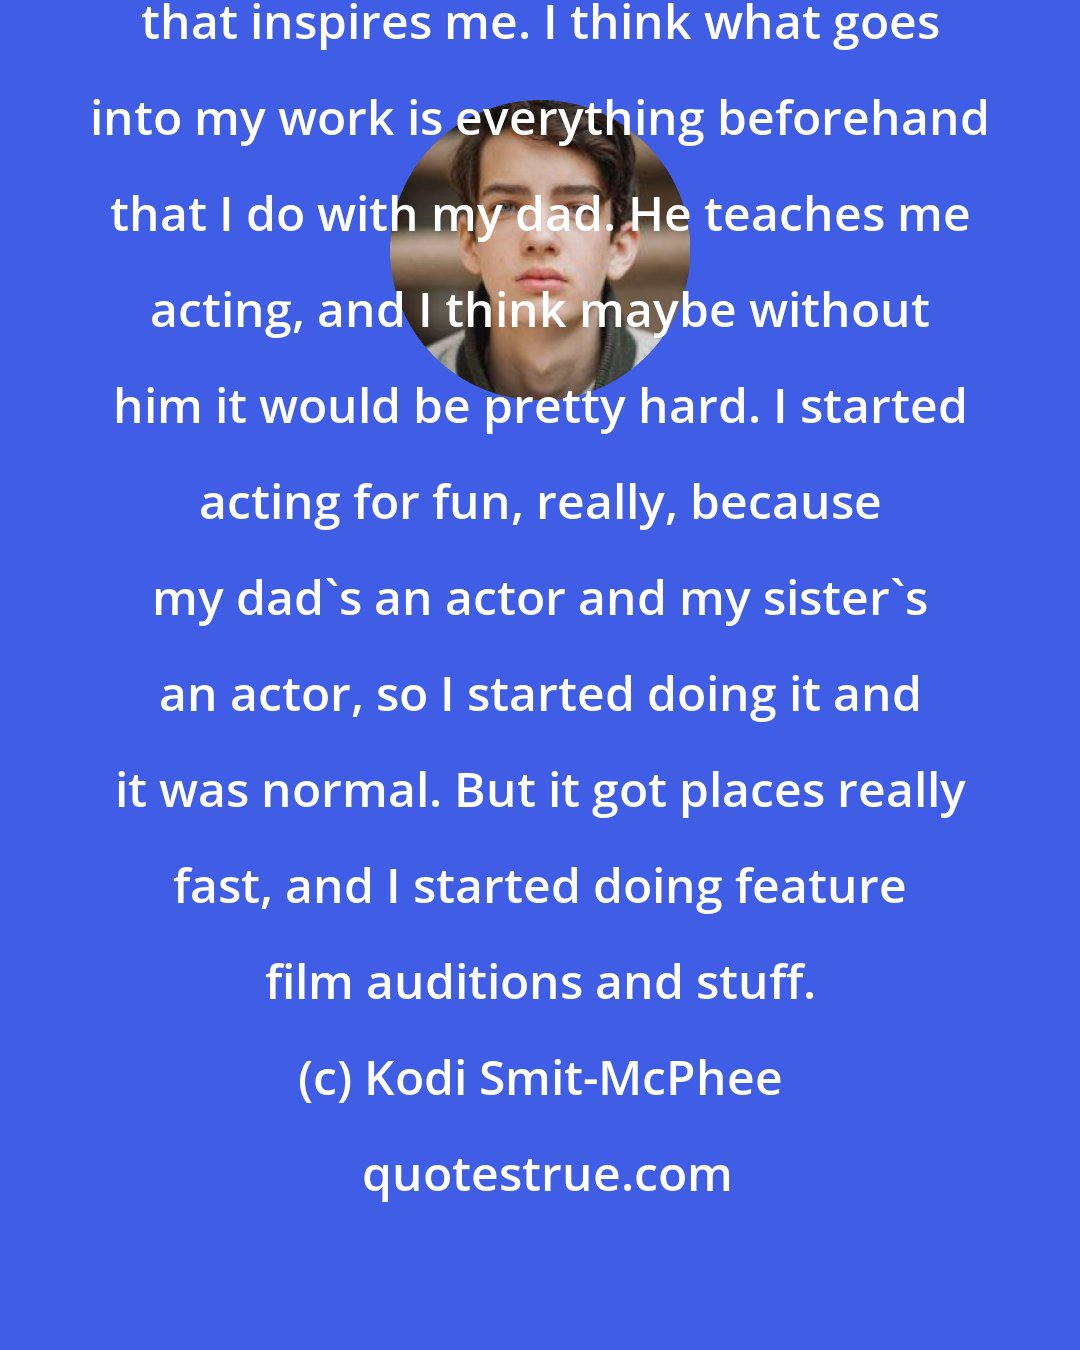 Kodi Smit-McPhee: I'm not really sure if I have anything that inspires me. I think what goes into my work is everything beforehand that I do with my dad. He teaches me acting, and I think maybe without him it would be pretty hard. I started acting for fun, really, because my dad's an actor and my sister's an actor, so I started doing it and it was normal. But it got places really fast, and I started doing feature film auditions and stuff.